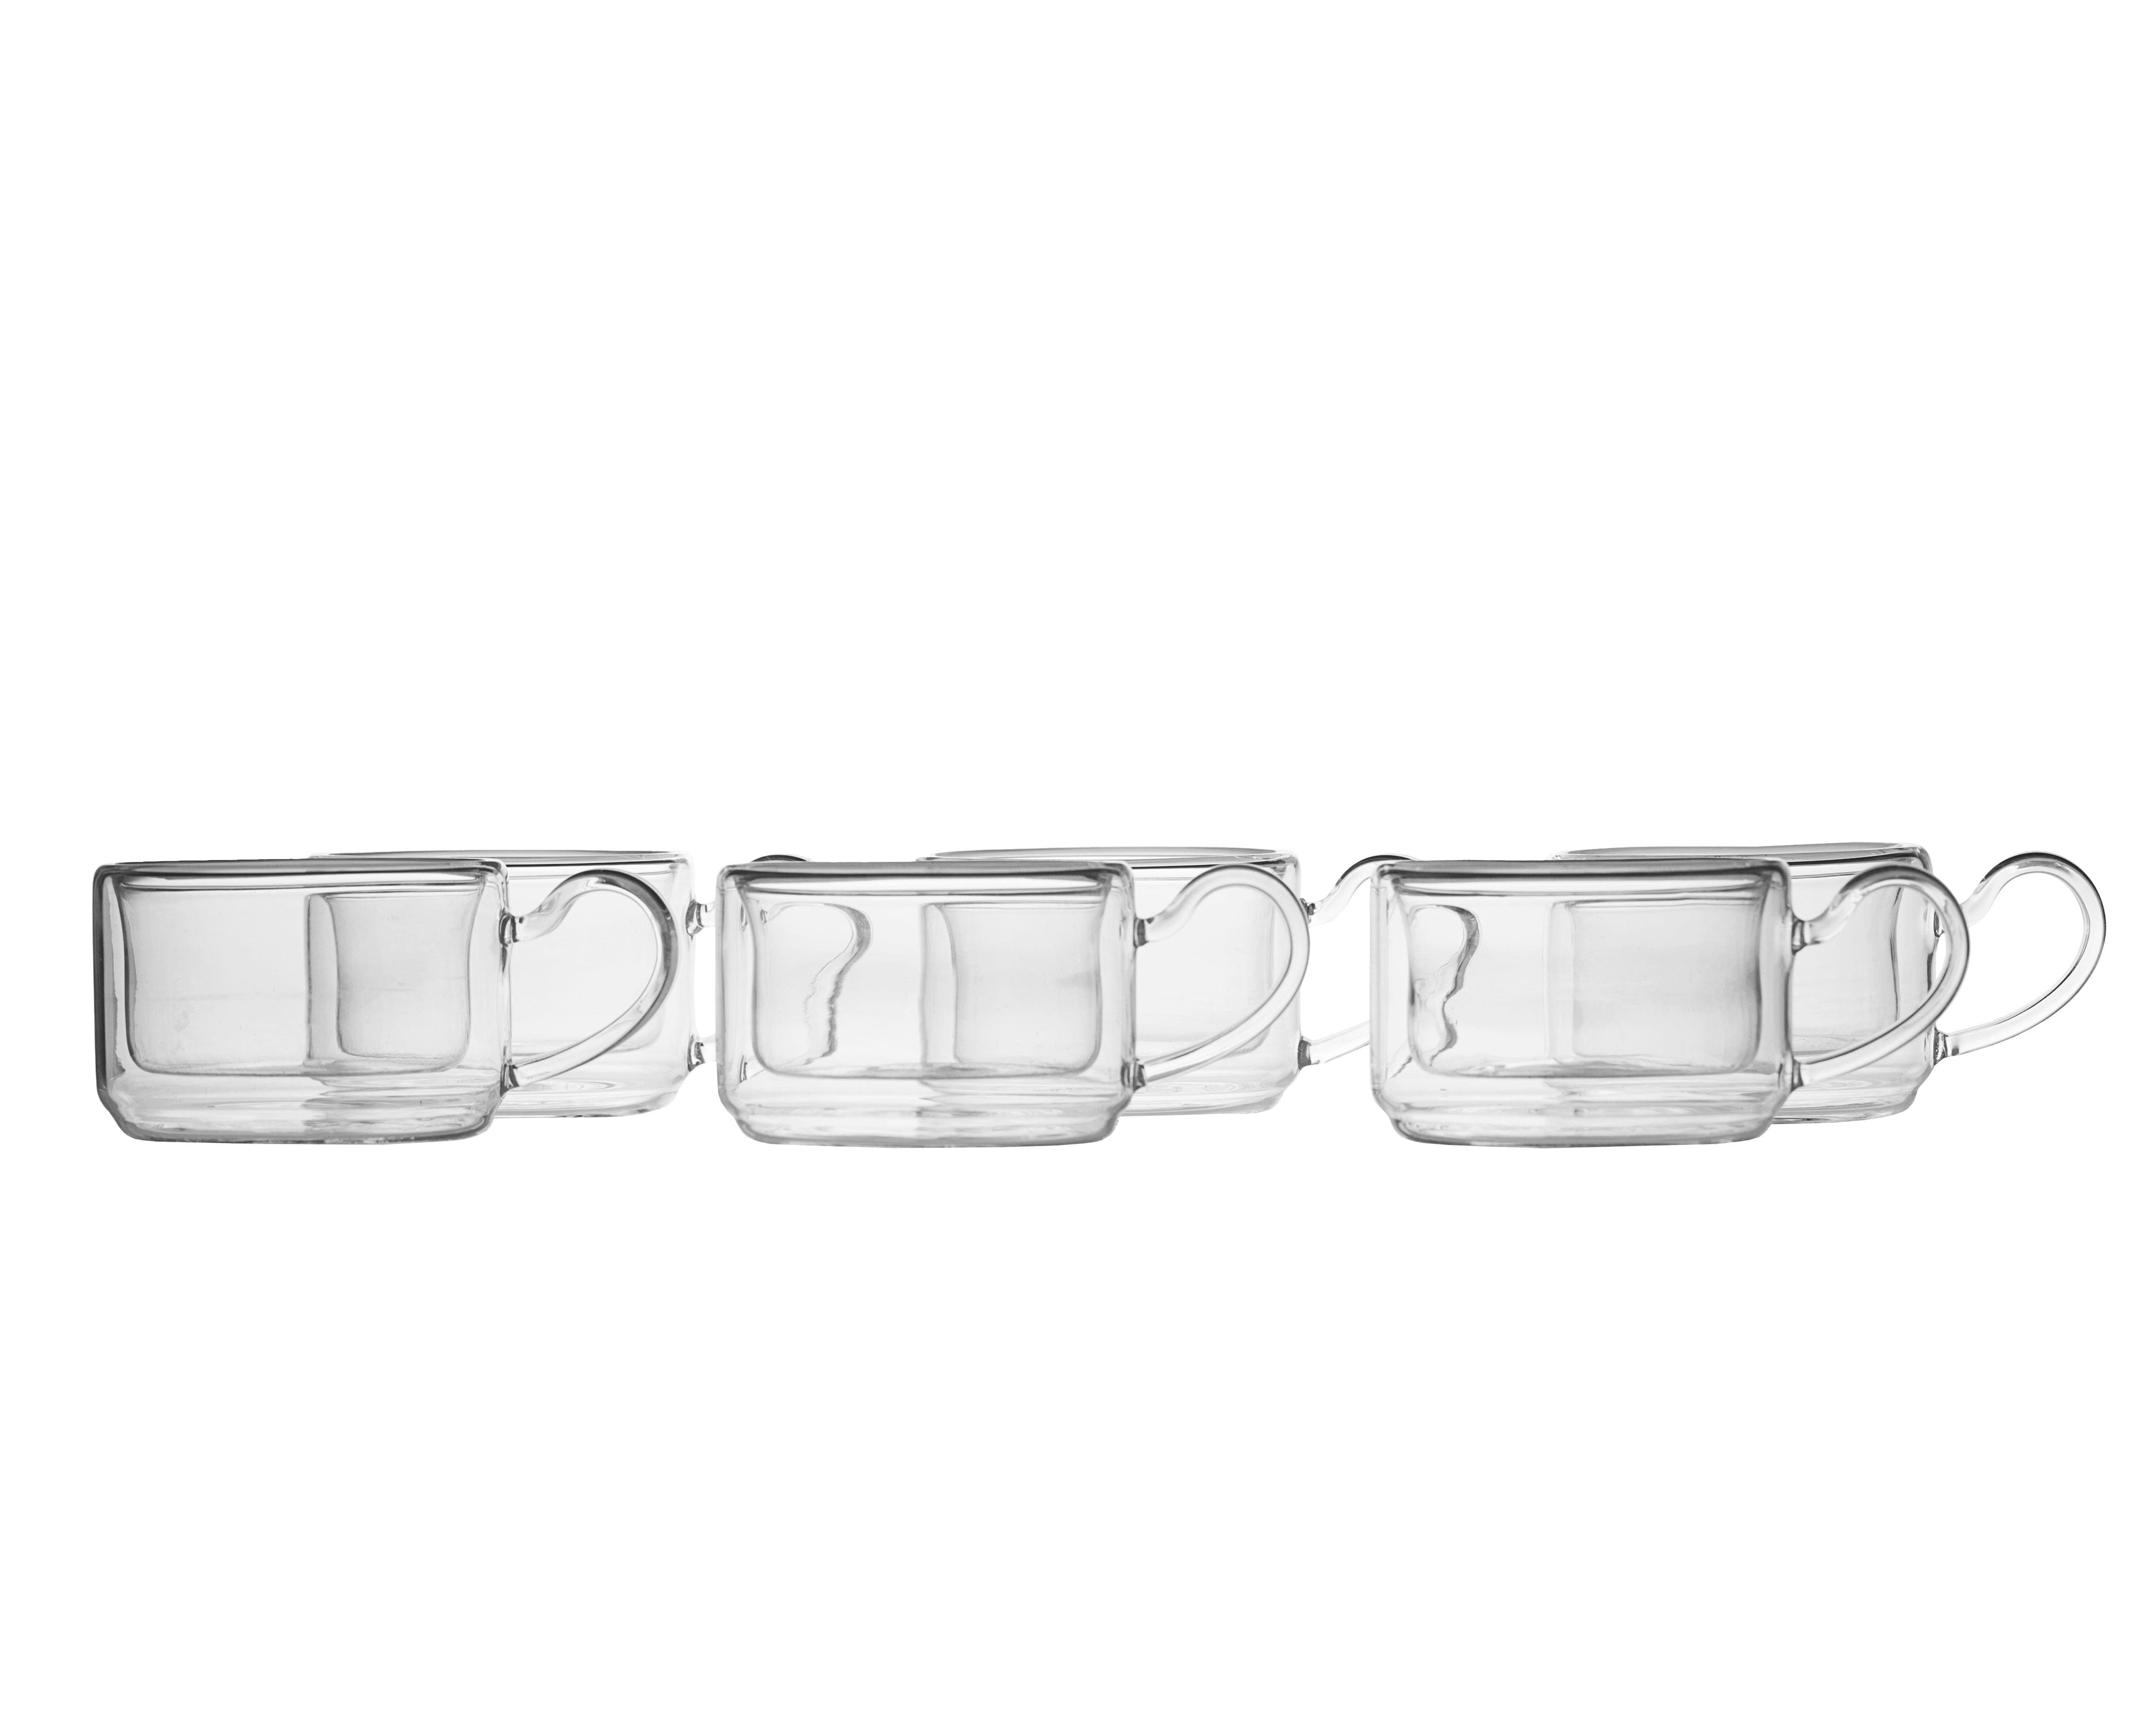 Double Wall Glass Square Tea Cup Set with Saucers (150 ml) (Set of 6)